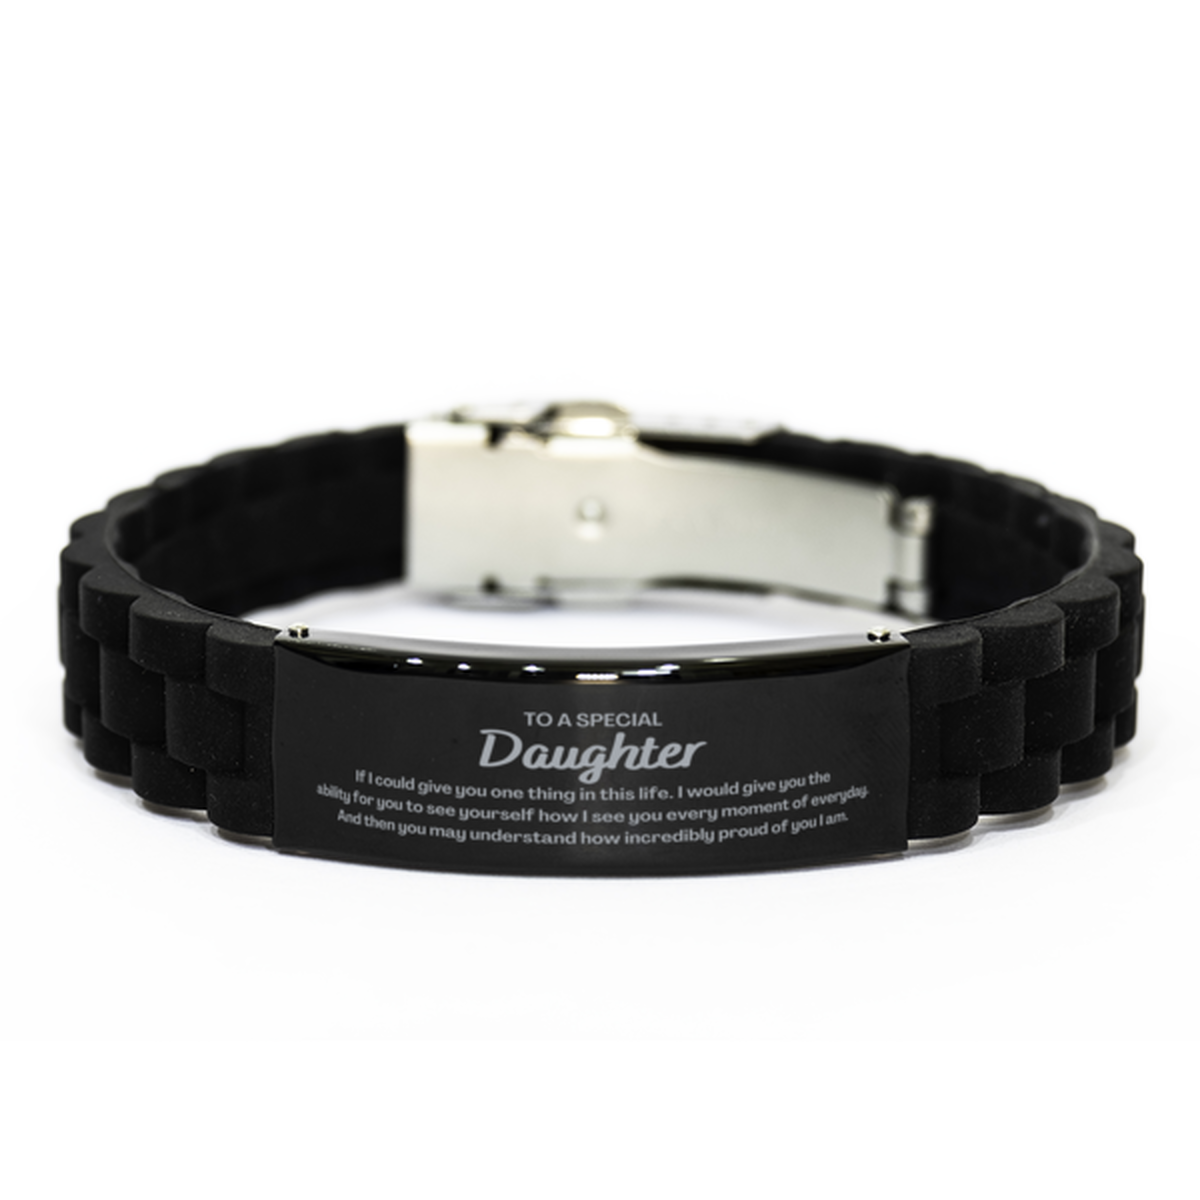 To My Daughter Black Glidelock Clasp Bracelet, Gifts For Daughter Engraved, Inspirational Gifts for Christmas Birthday, Epic Gifts for Daughter To A Special Daughter how incredibly proud of you I am